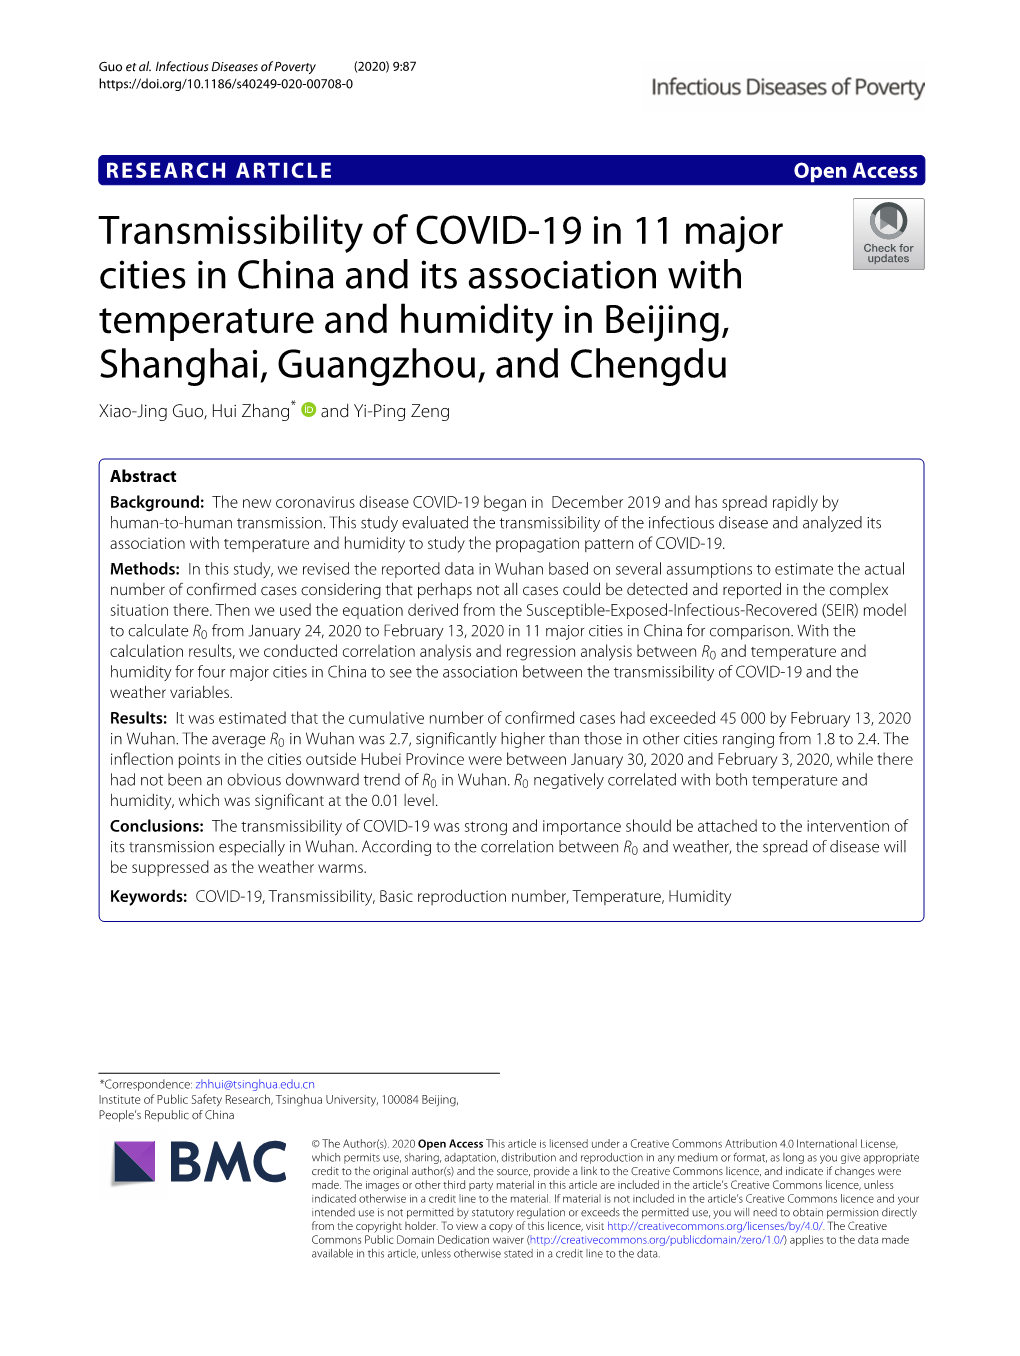 Transmissibility of COVID-19 in 11 Major Cities in China and Its